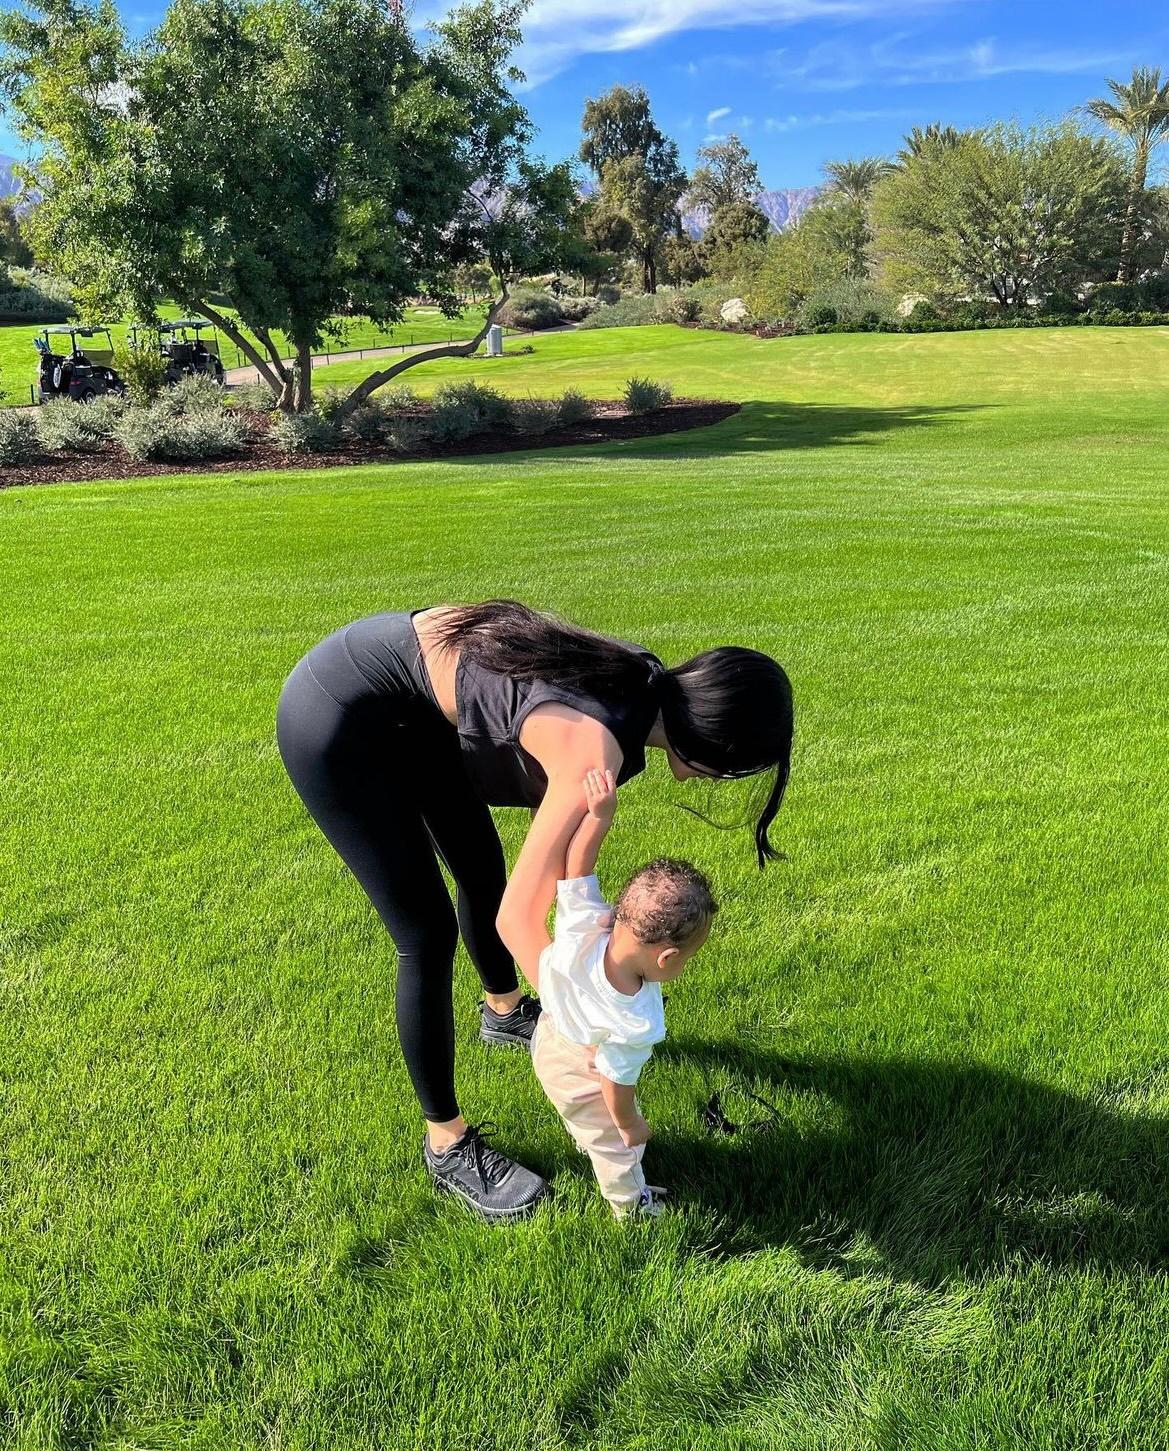 Kylie Jenner plays with her son